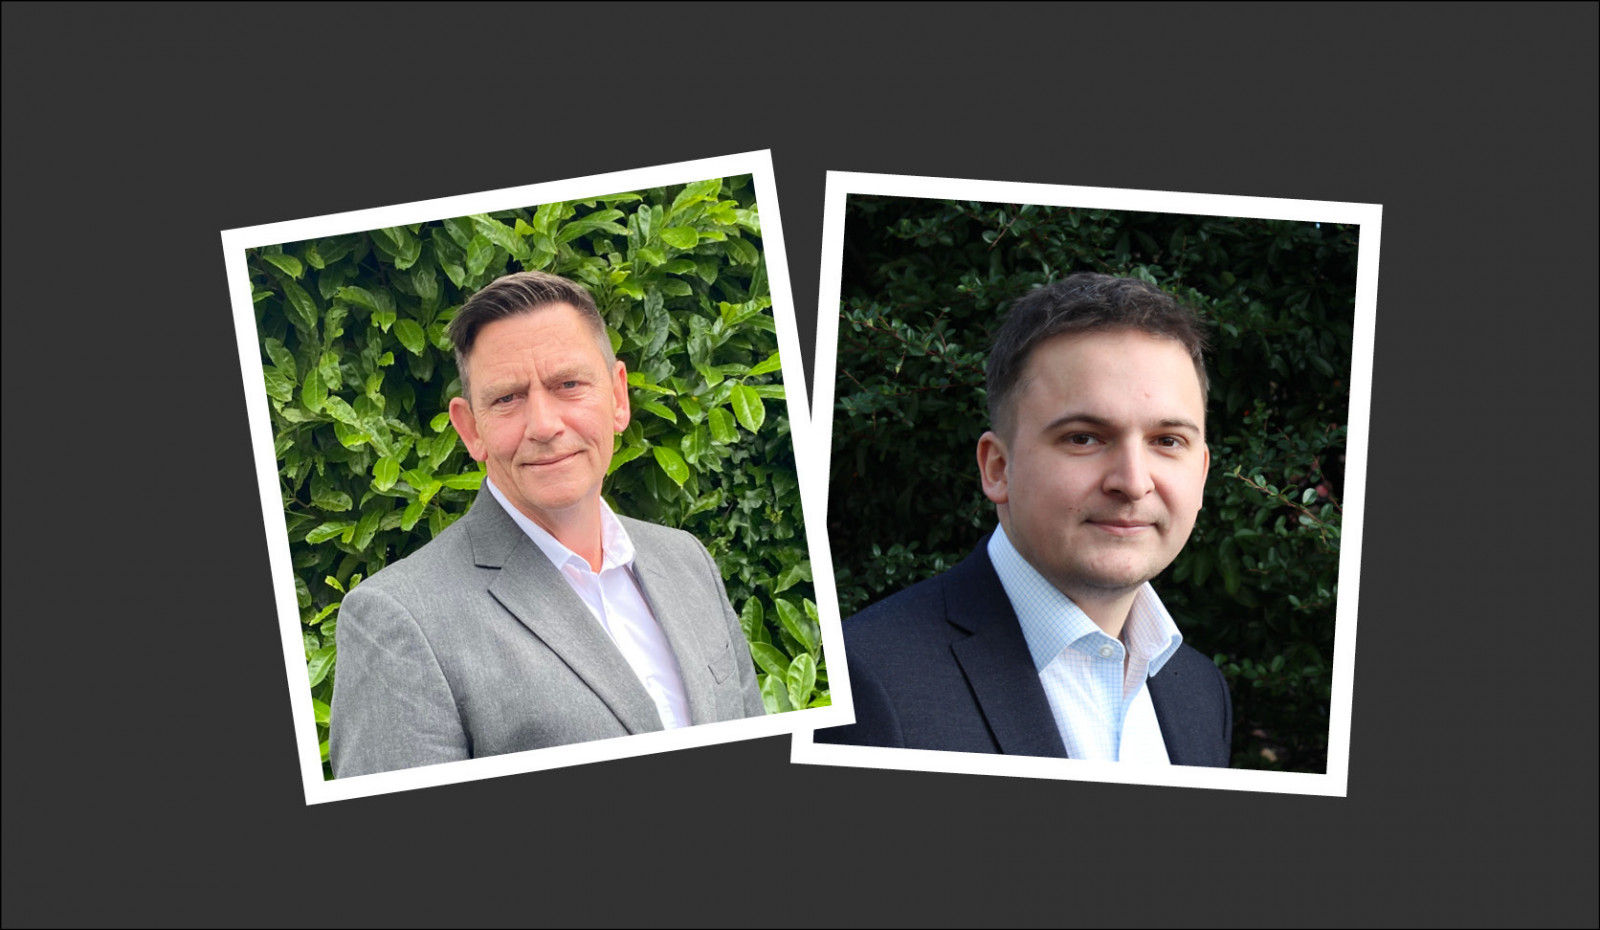 Control Energy Costs expands the business development team